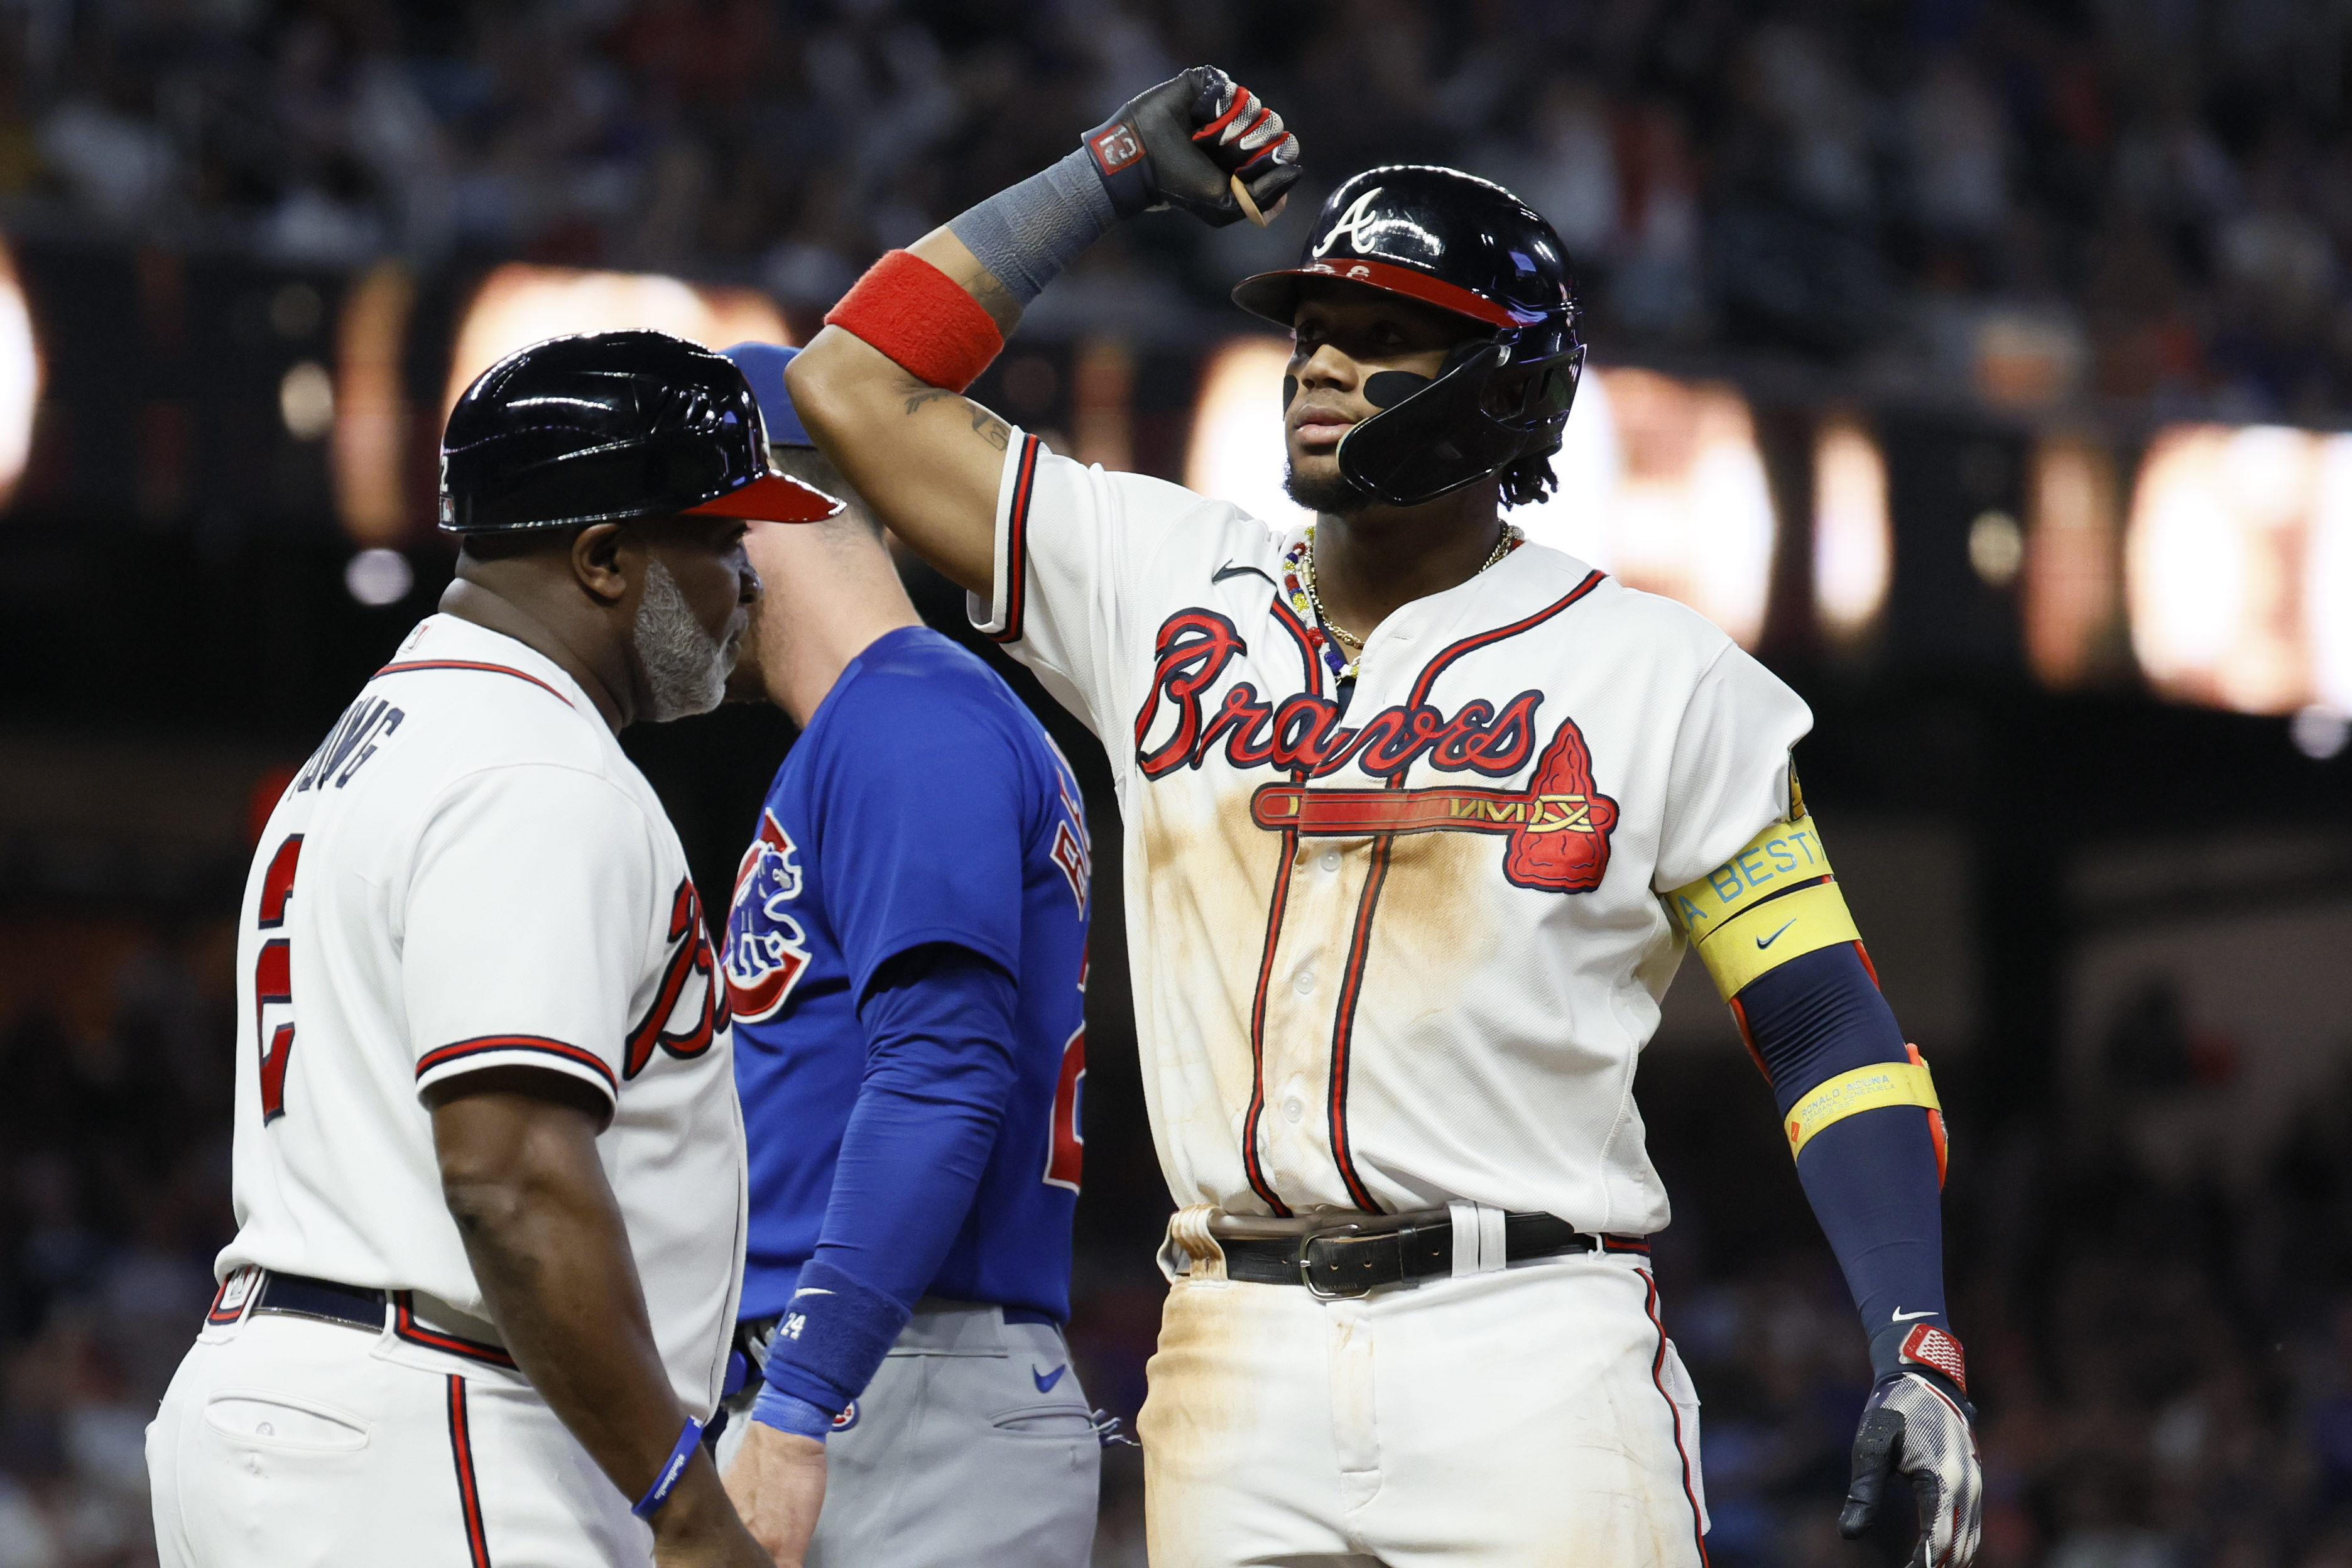 Get ready for the MLB Postseason with some Atlanta Braves gear 